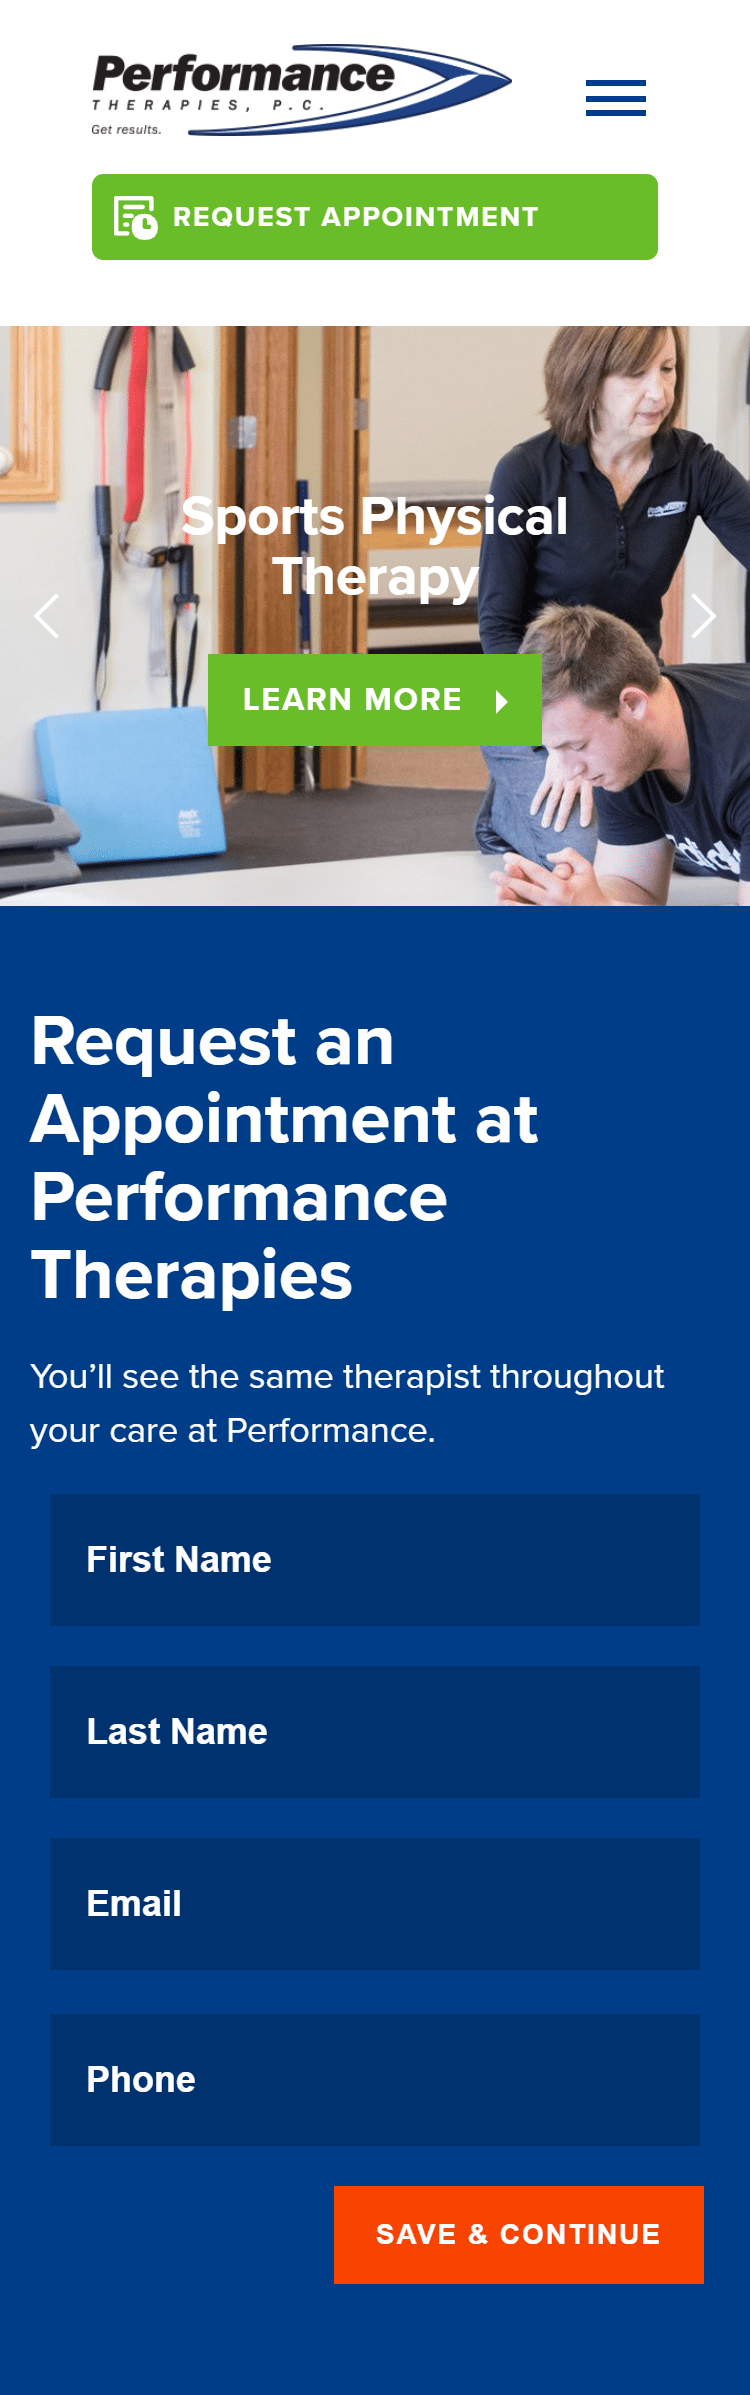 Performance therapies mobile